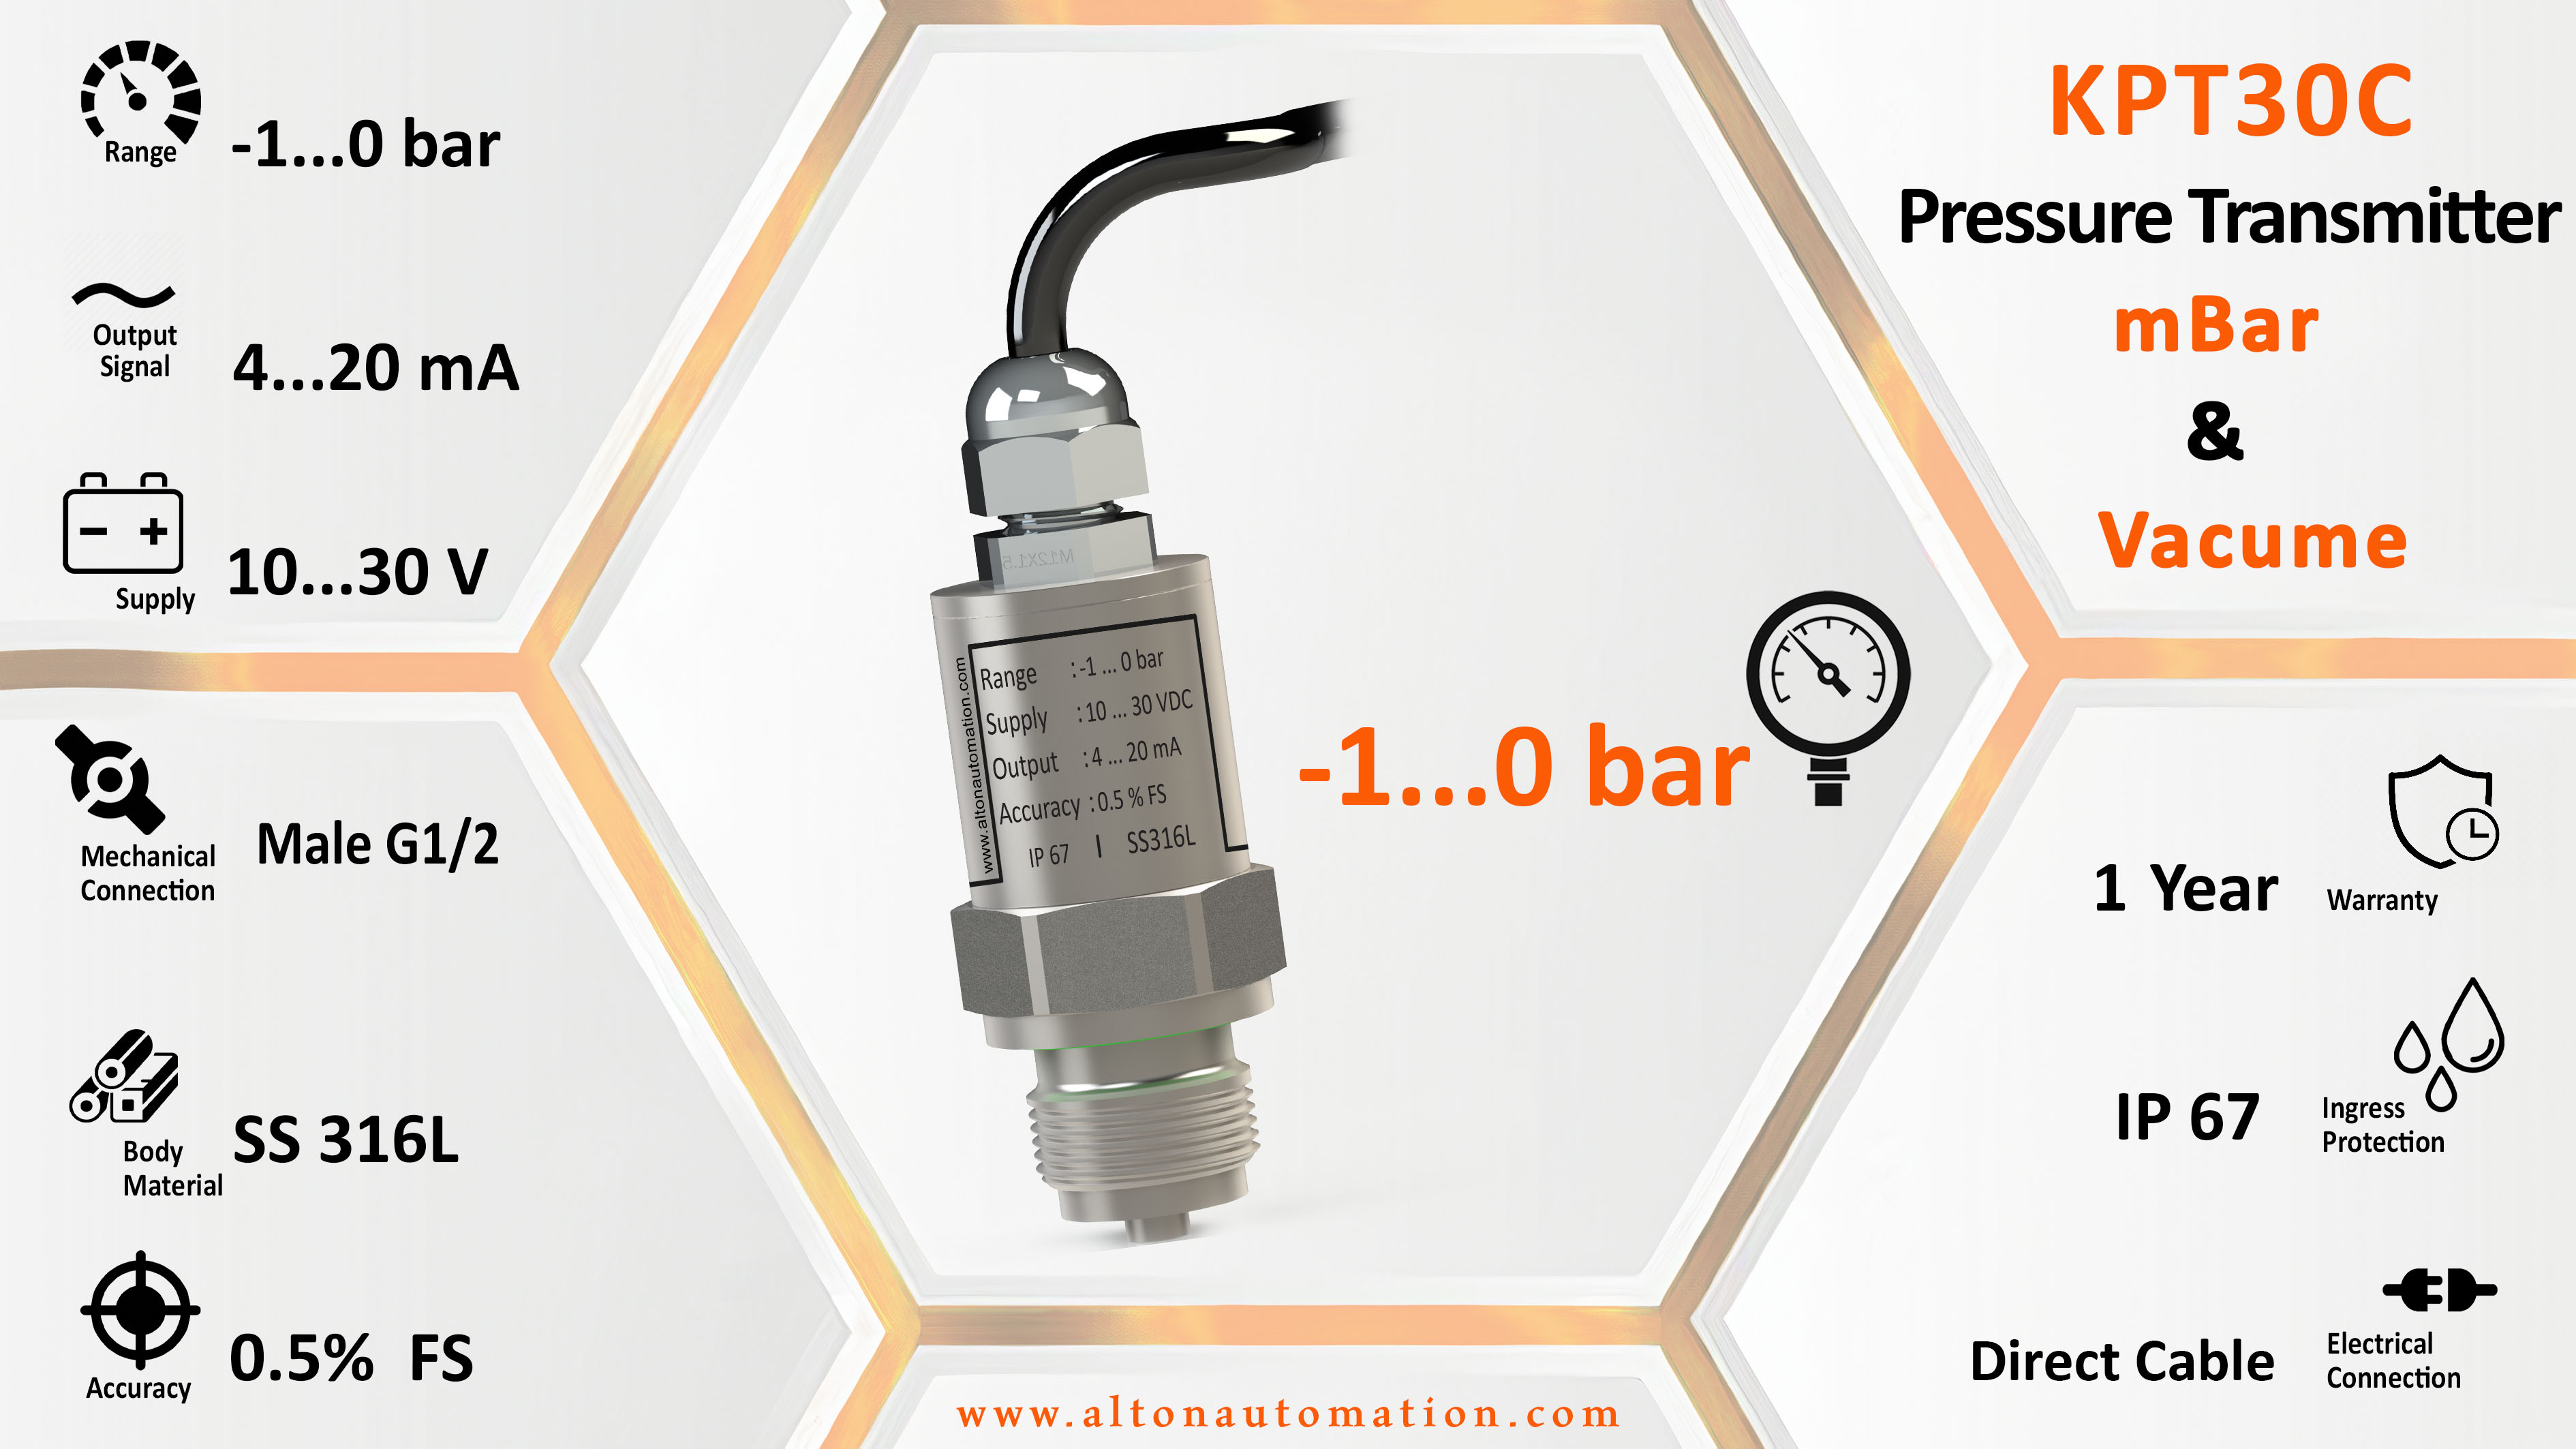 Pressure Transmitter for mbar and vacume_KPT30C-V10-C1-MG2_image_2